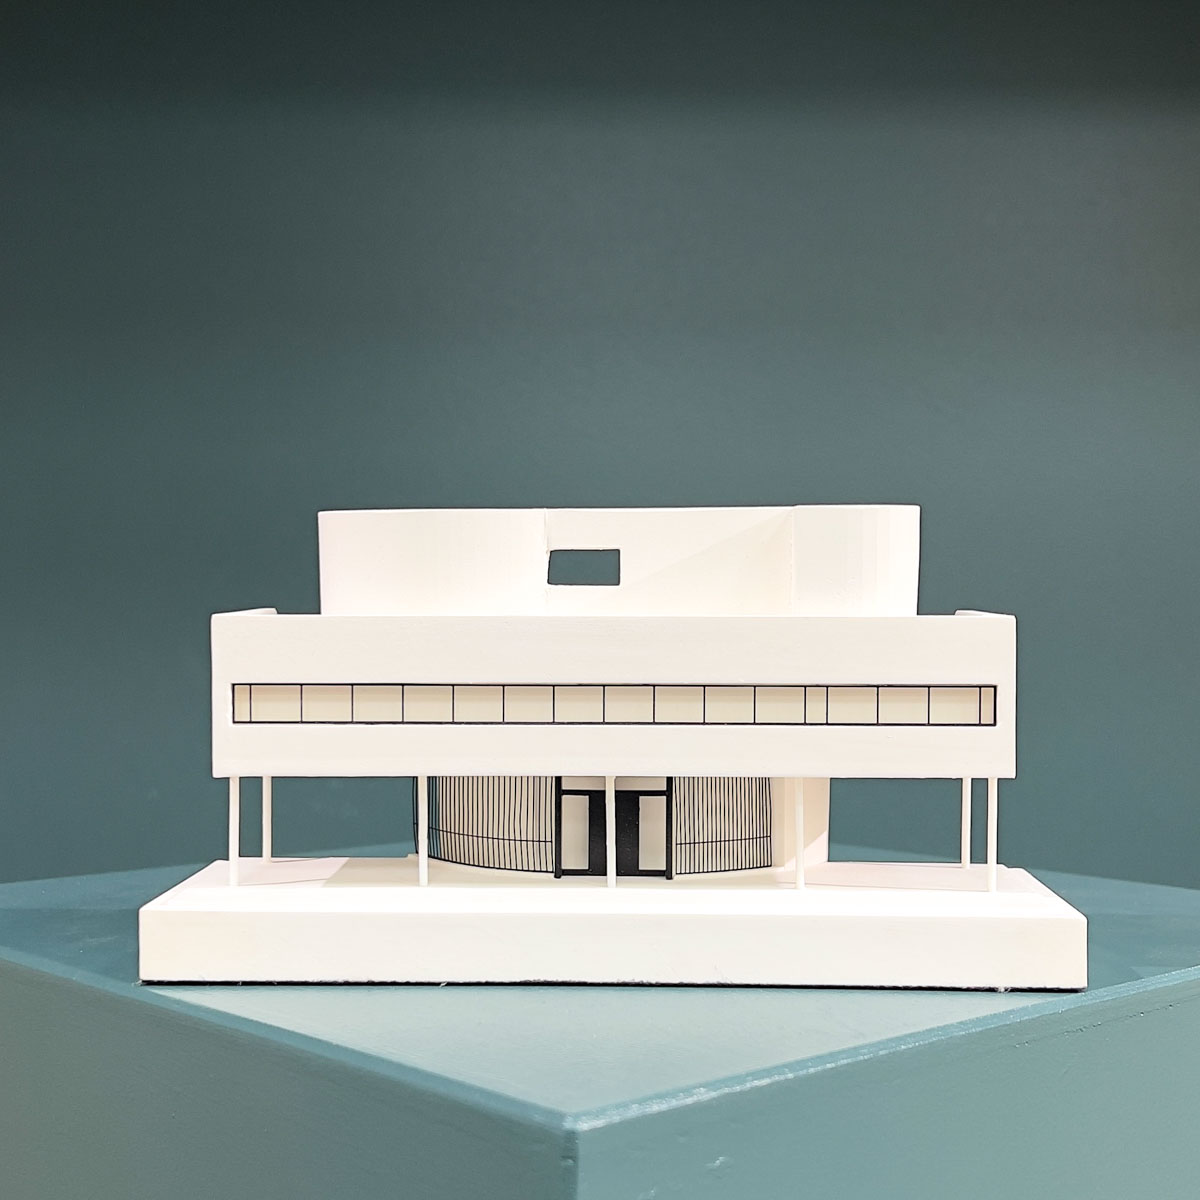 Villa Savoye Model. Product Shot Front View. Architectural Sculpture by Chisel & Mouse